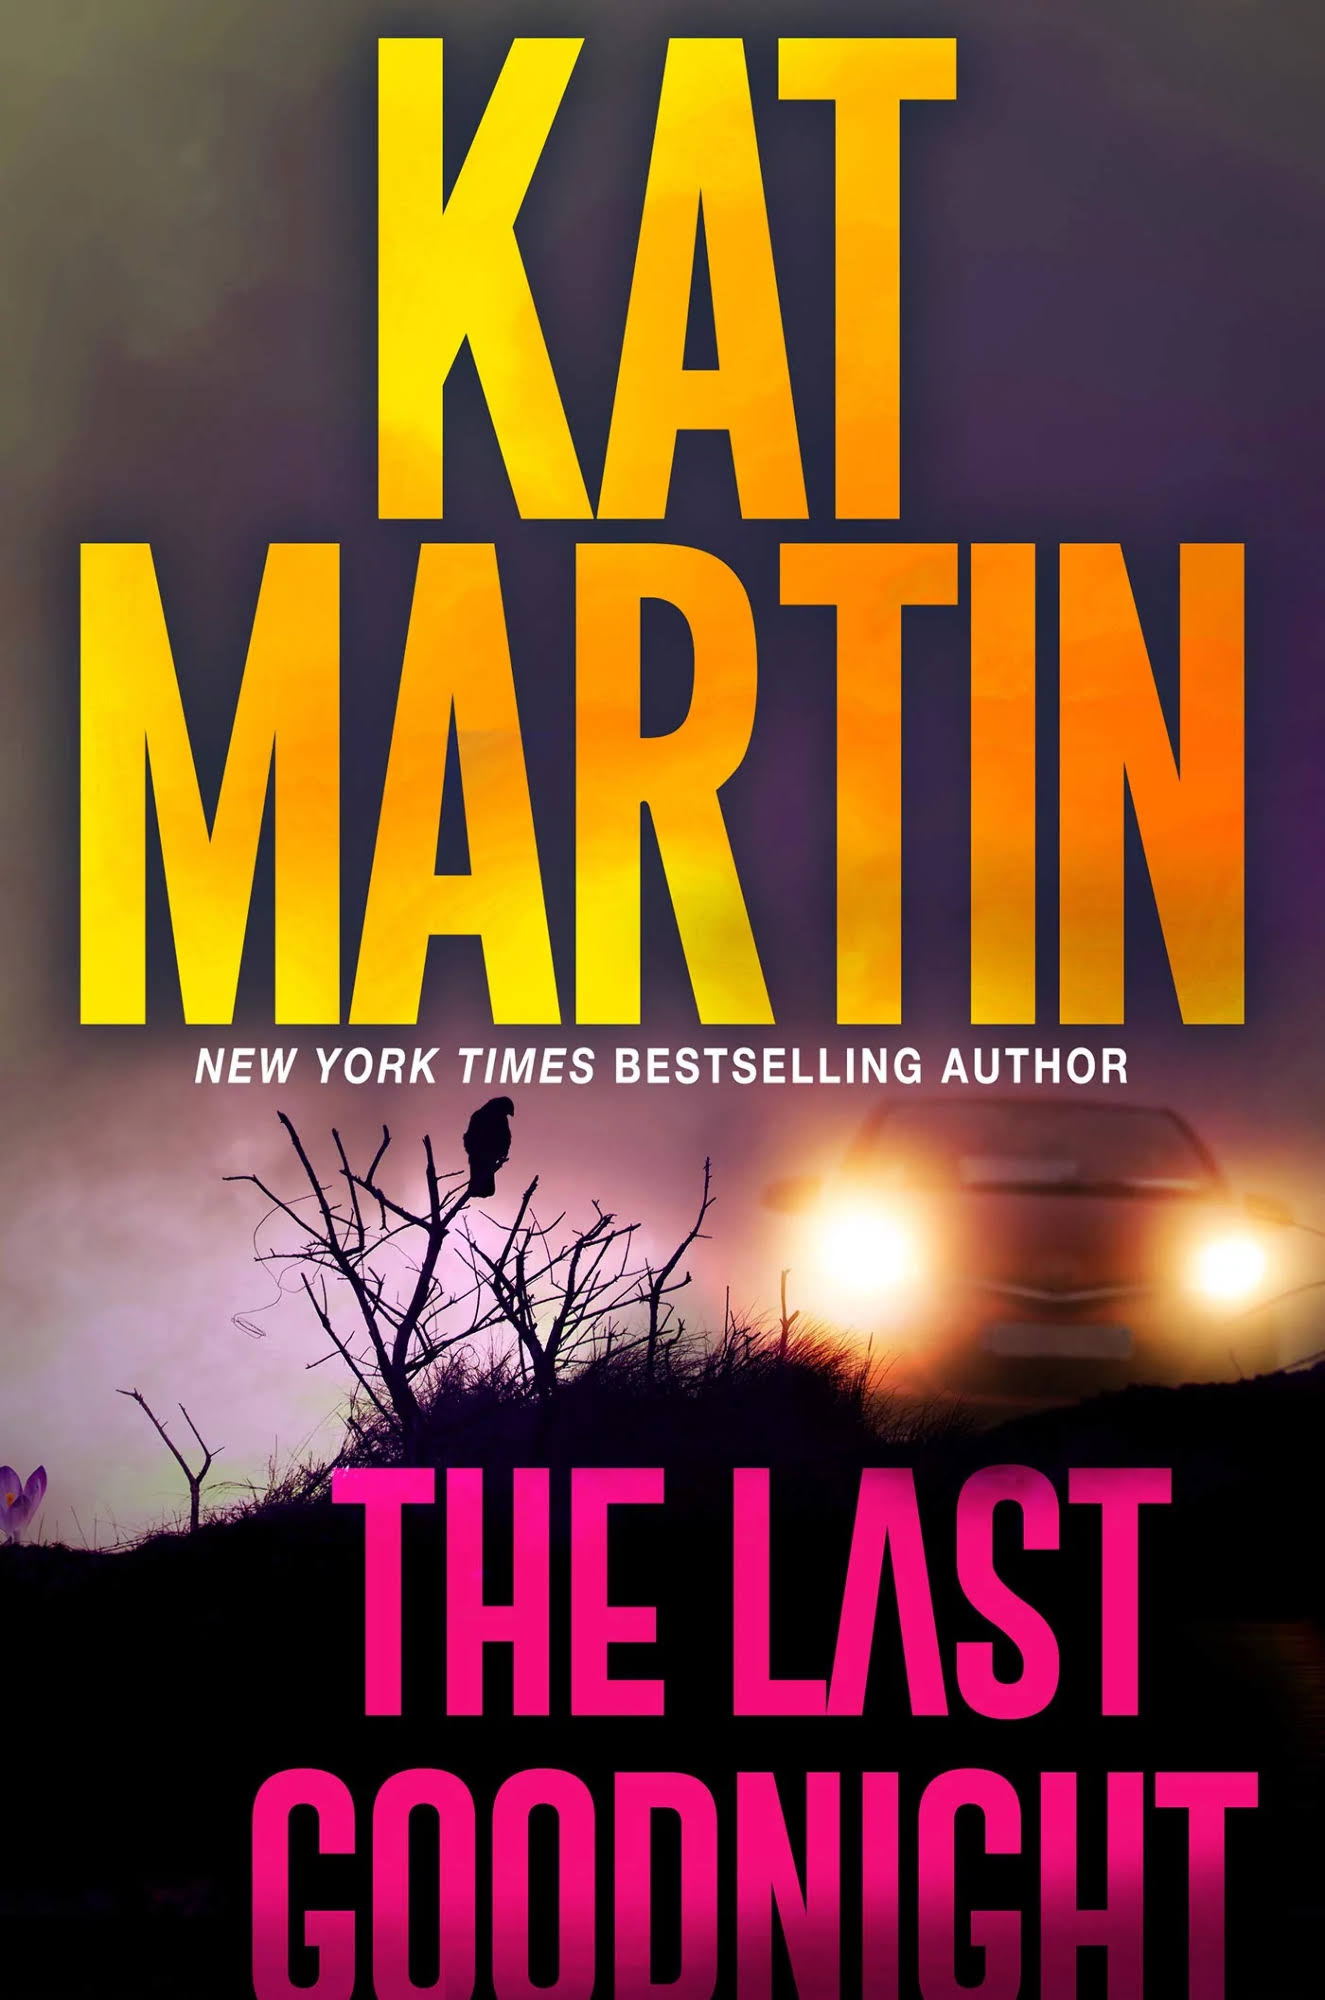 The Last Goodnight (Blood Ties, The Logans, Bk. 1) by Kat Martin